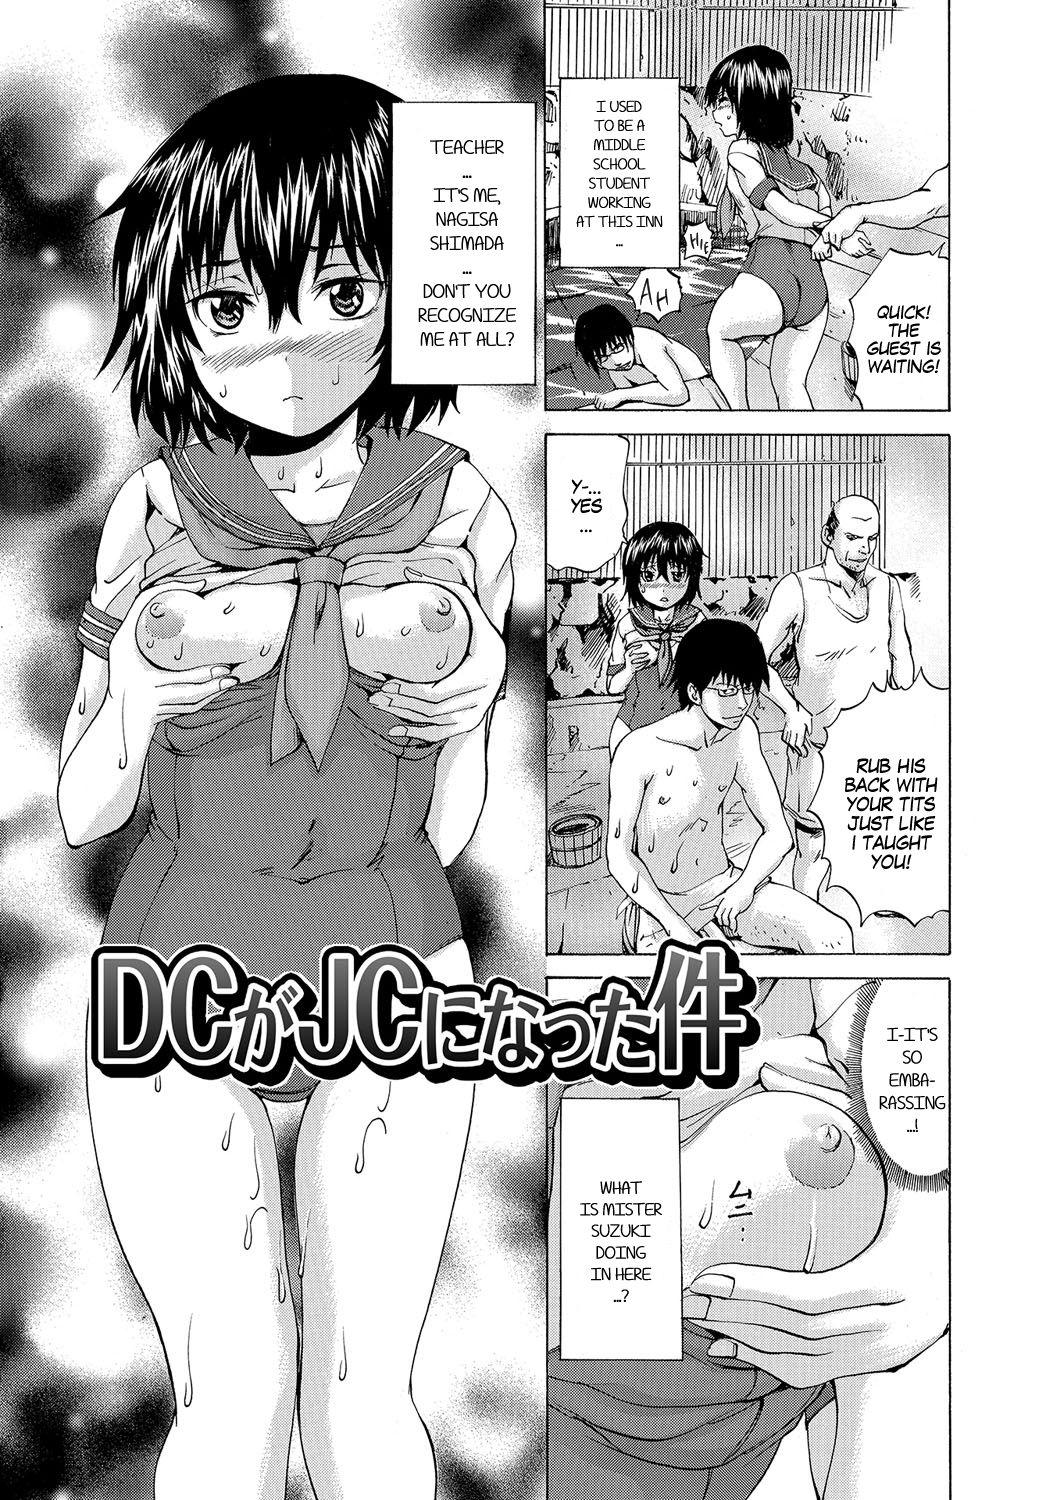 Ftvgirls The Case of DC Turning Into JC/The Case of a Middle School Boy Turning Into a Middle School Girl Namorada - Picture 1